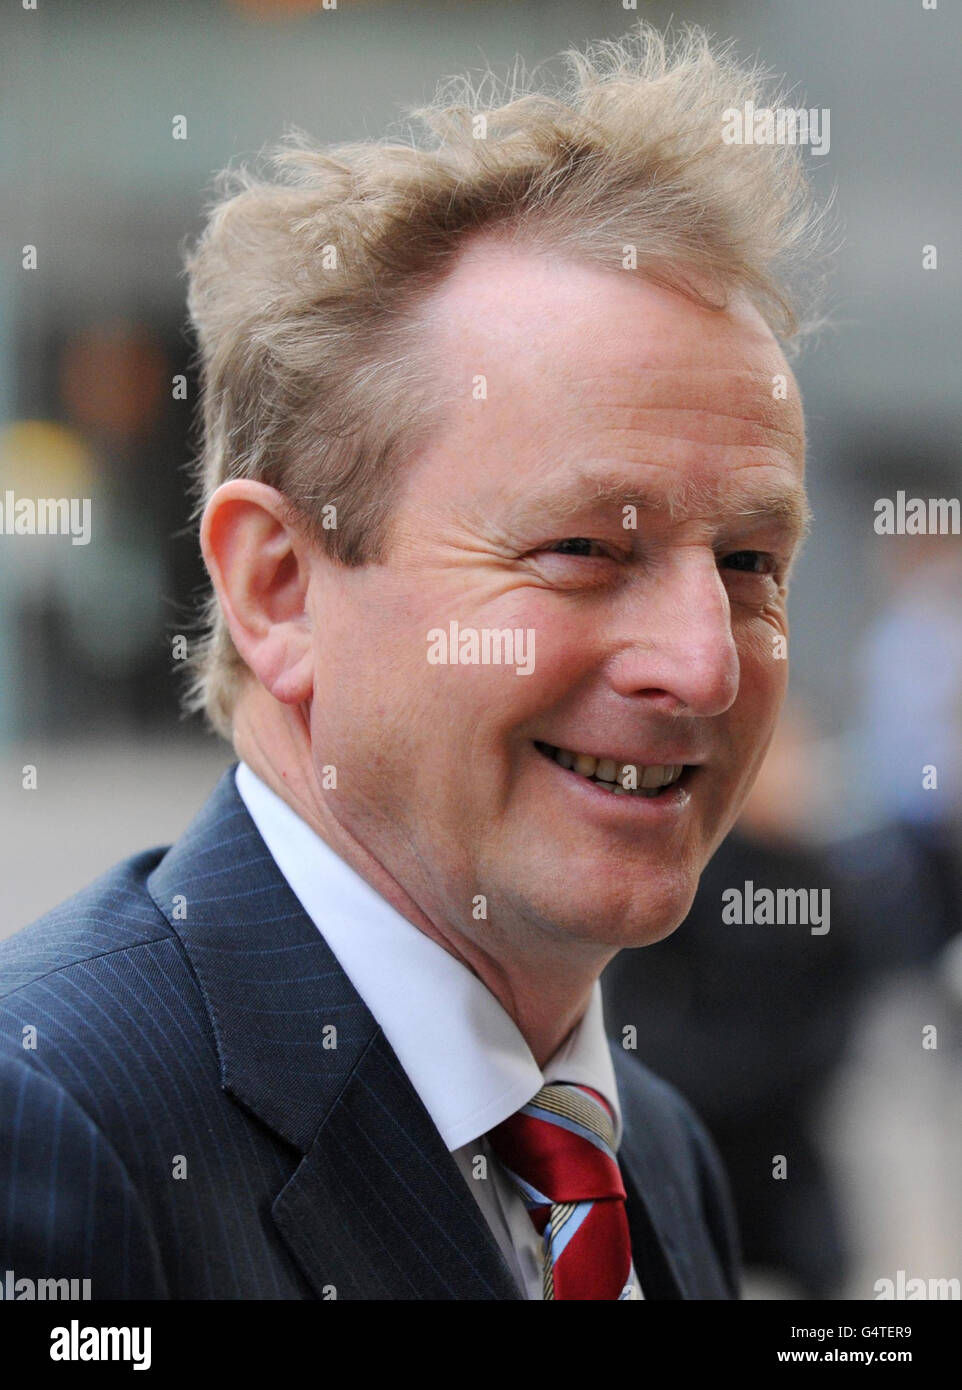 Irish Taoiseach Enda Kenny arrives at Thomson Reuters, in Canary Wharf, London where he is due to give a speech at the start of his visit to the UK. Stock Photo